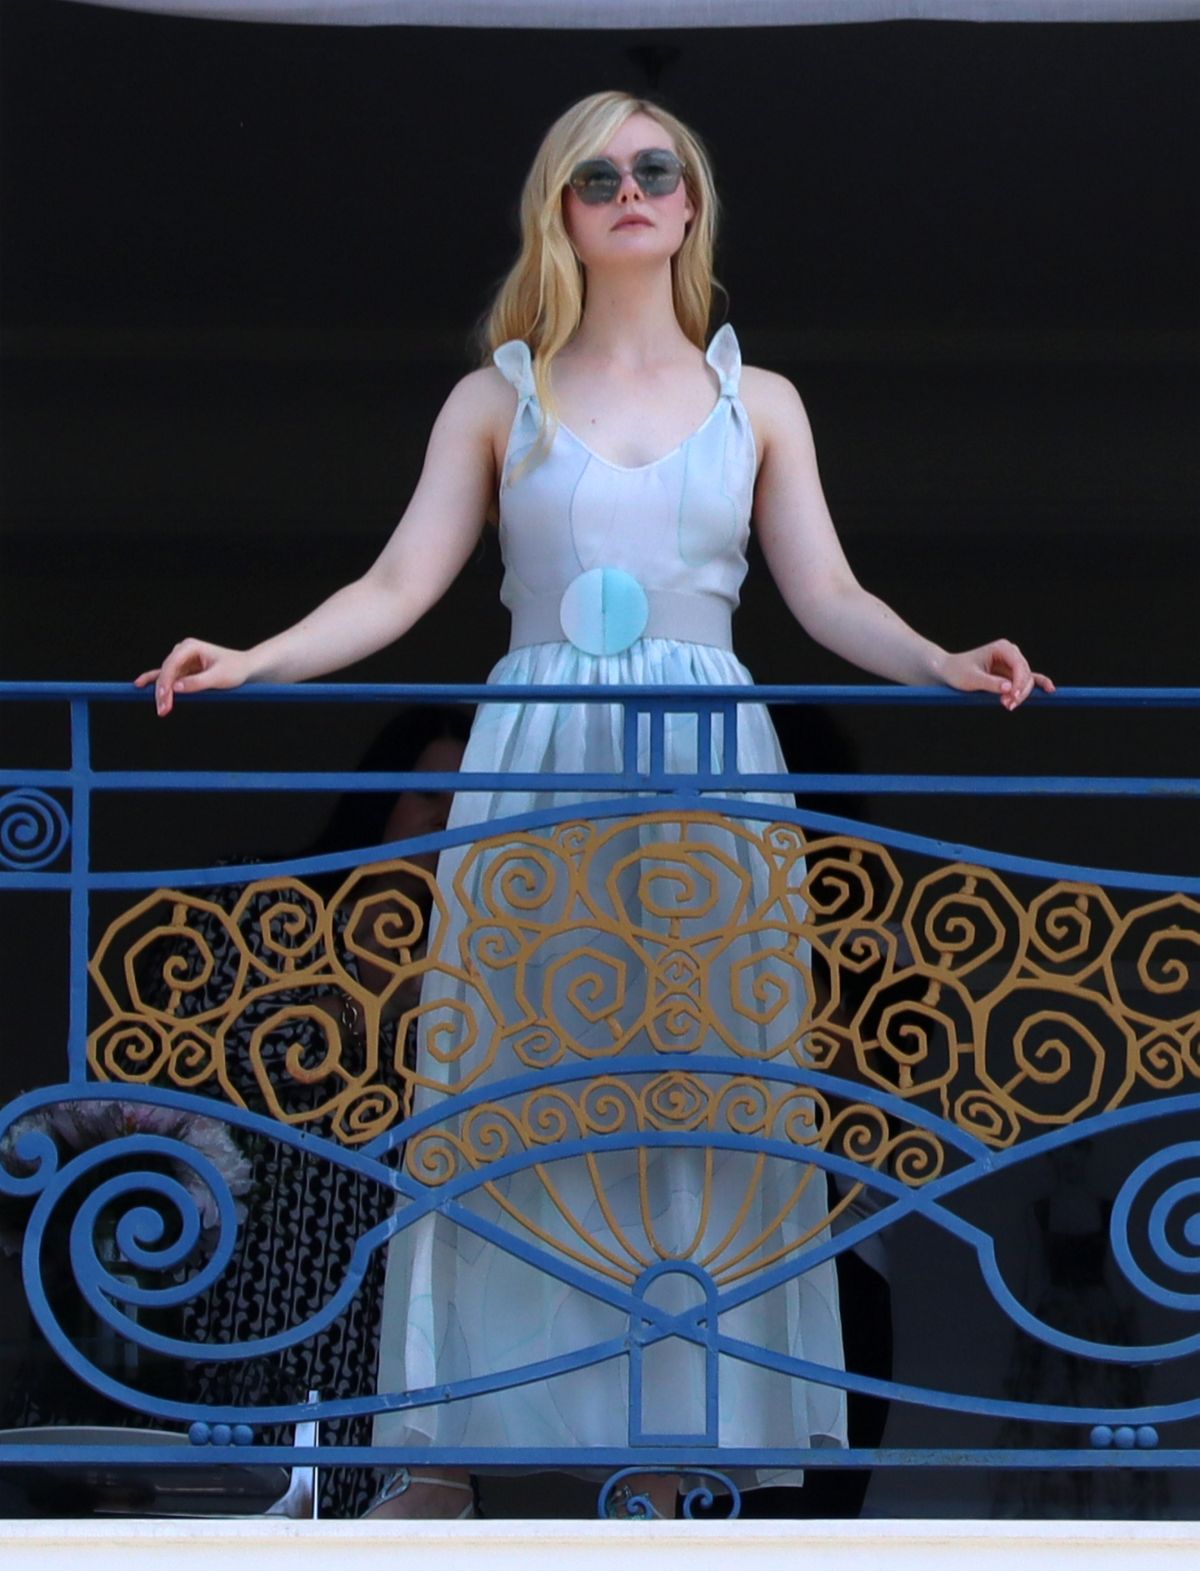 ELLE FANNING at Balcony of Hotel Martinez at Cannes Film Festival  05/19/2022 – HawtCelebs